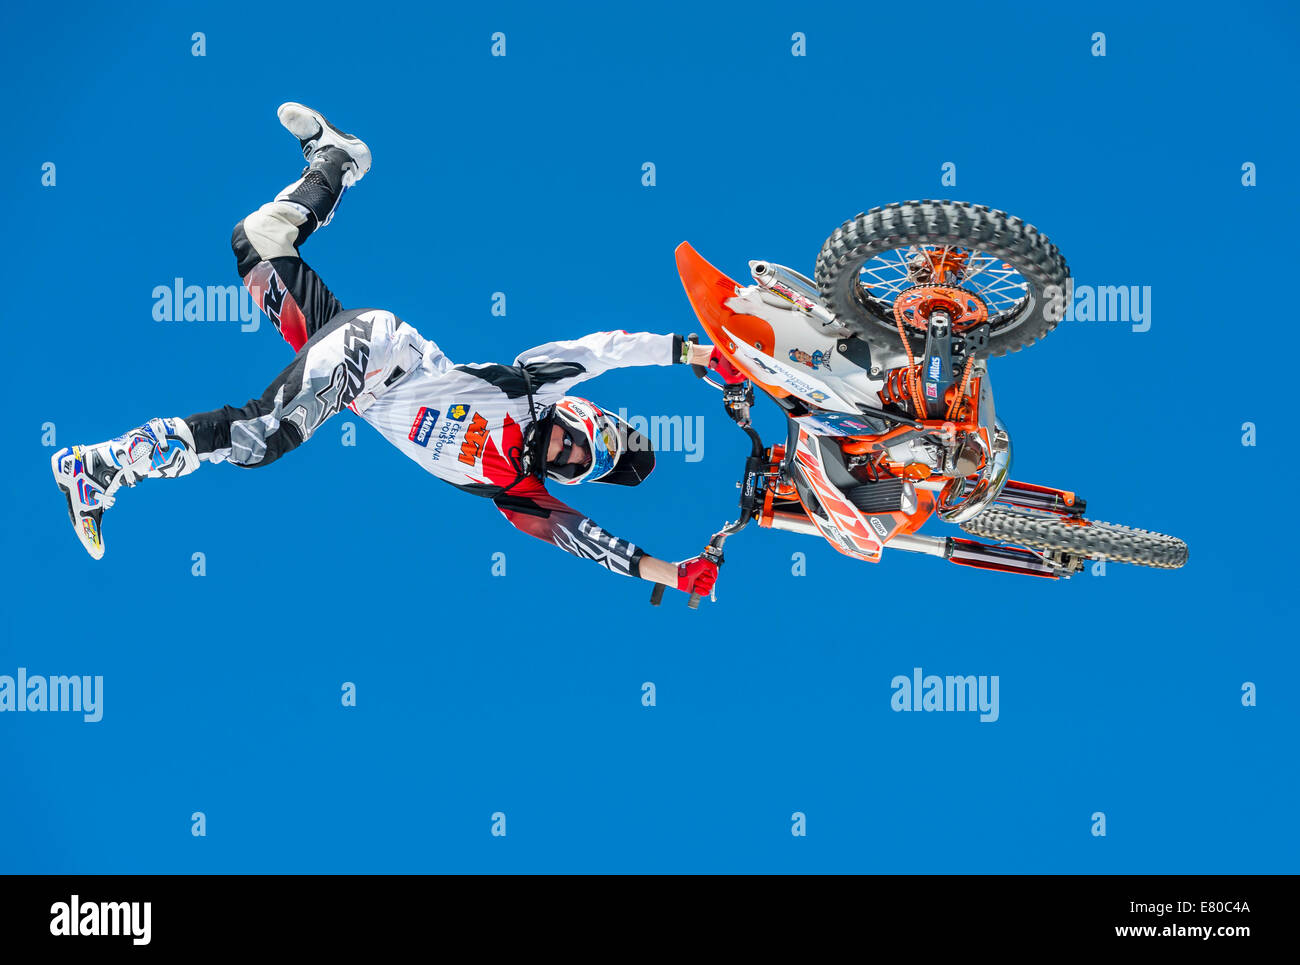 Zurich, Switzerland. 27th Sep, 2014. Petr Pilat (CZE) high up in the air during the FMX style session at the 20th anniversary of 'freestyle.ch', Europe's largest freestyle event at Zurich. Credit:  Erik Tham/Alamy Live News Stock Photo